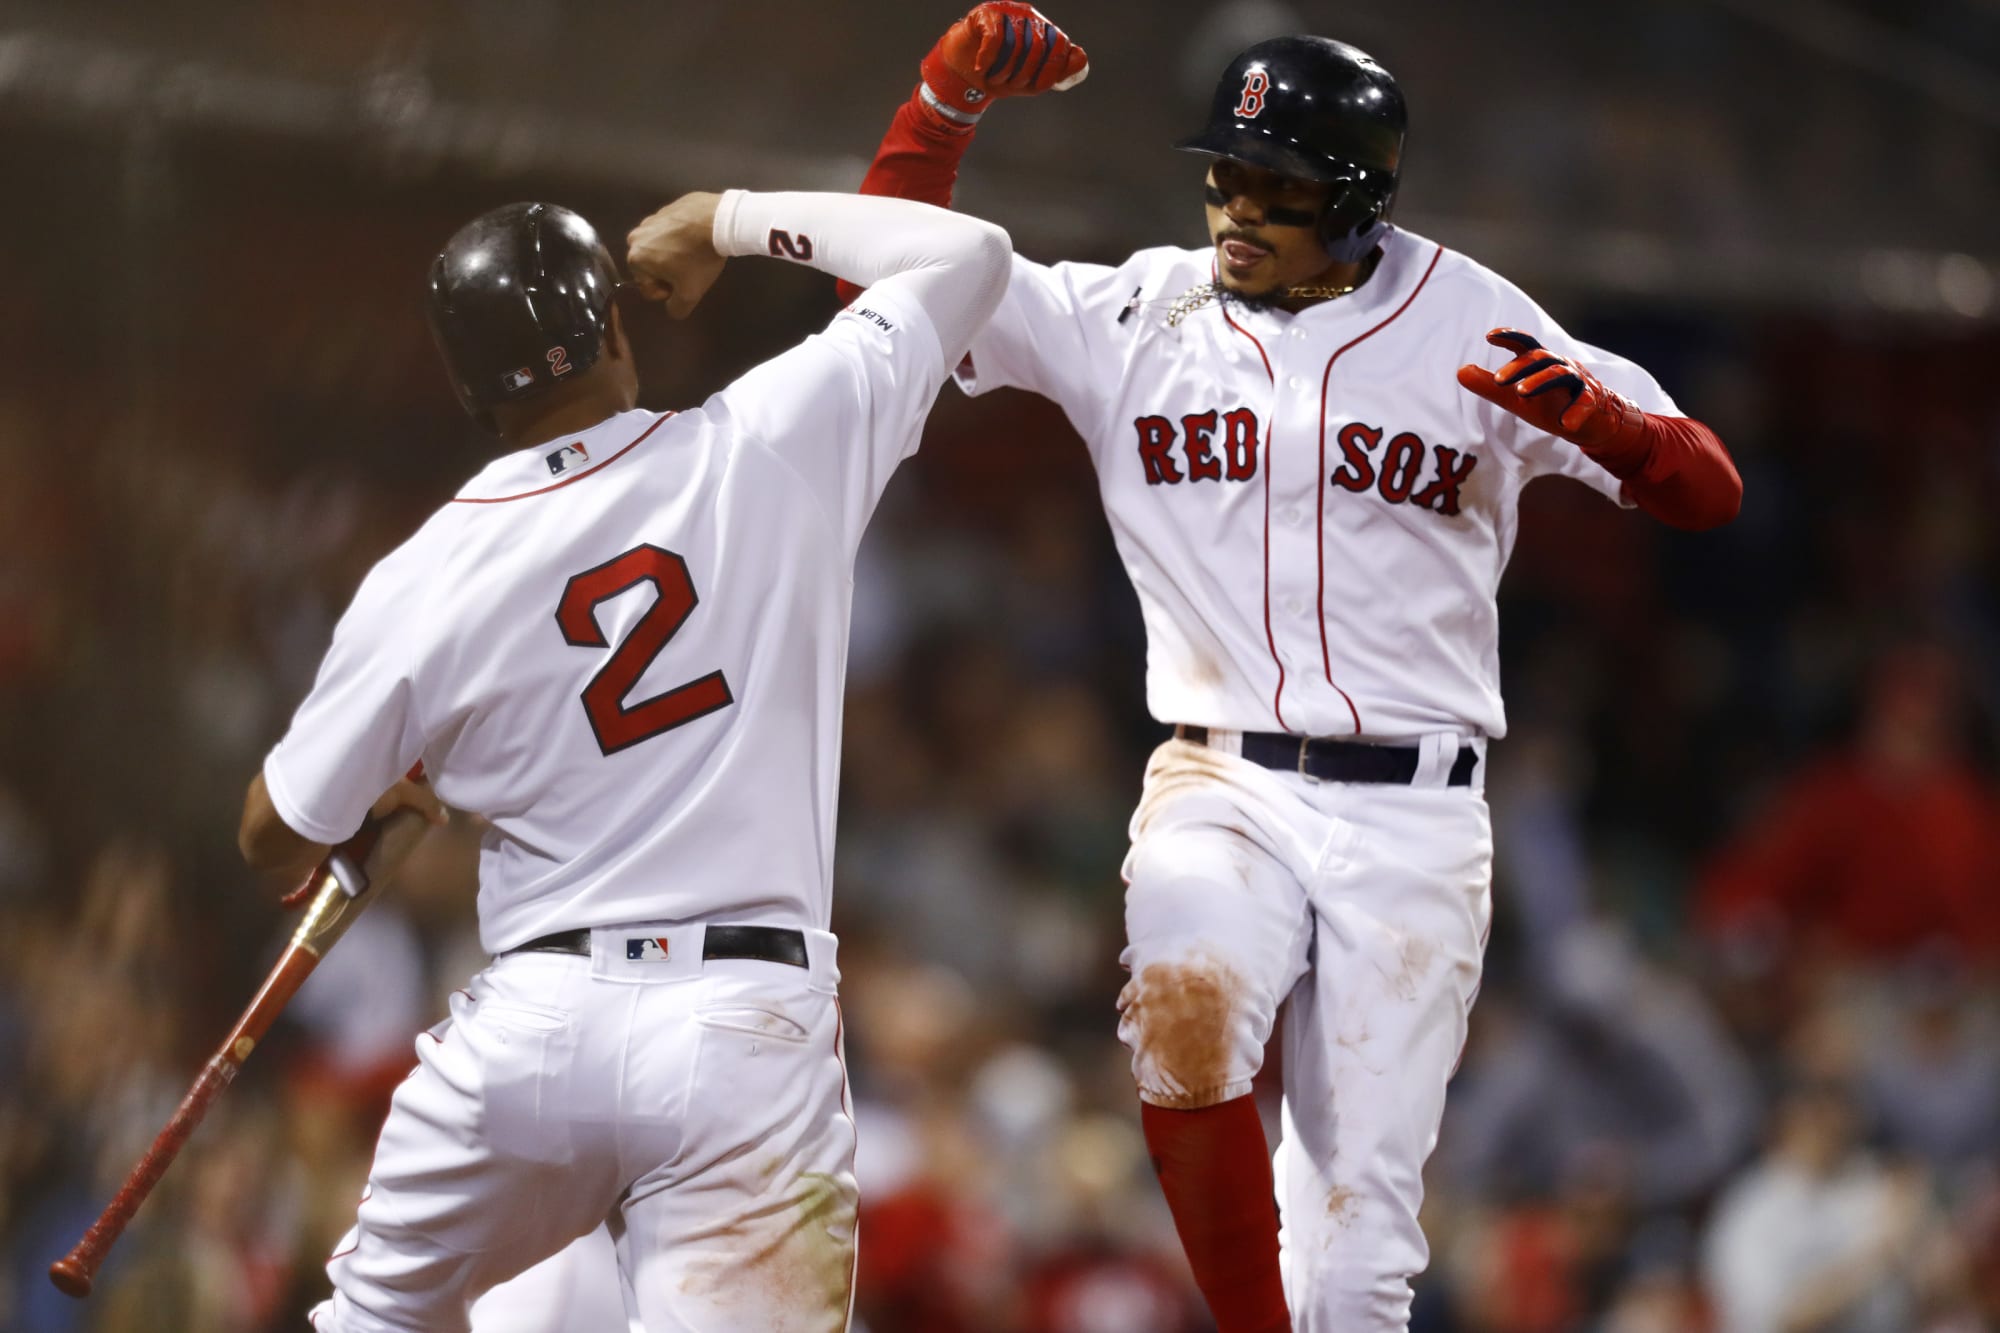 Red Sox make five appearances on ESPN's Sunday Night Baseball in 8